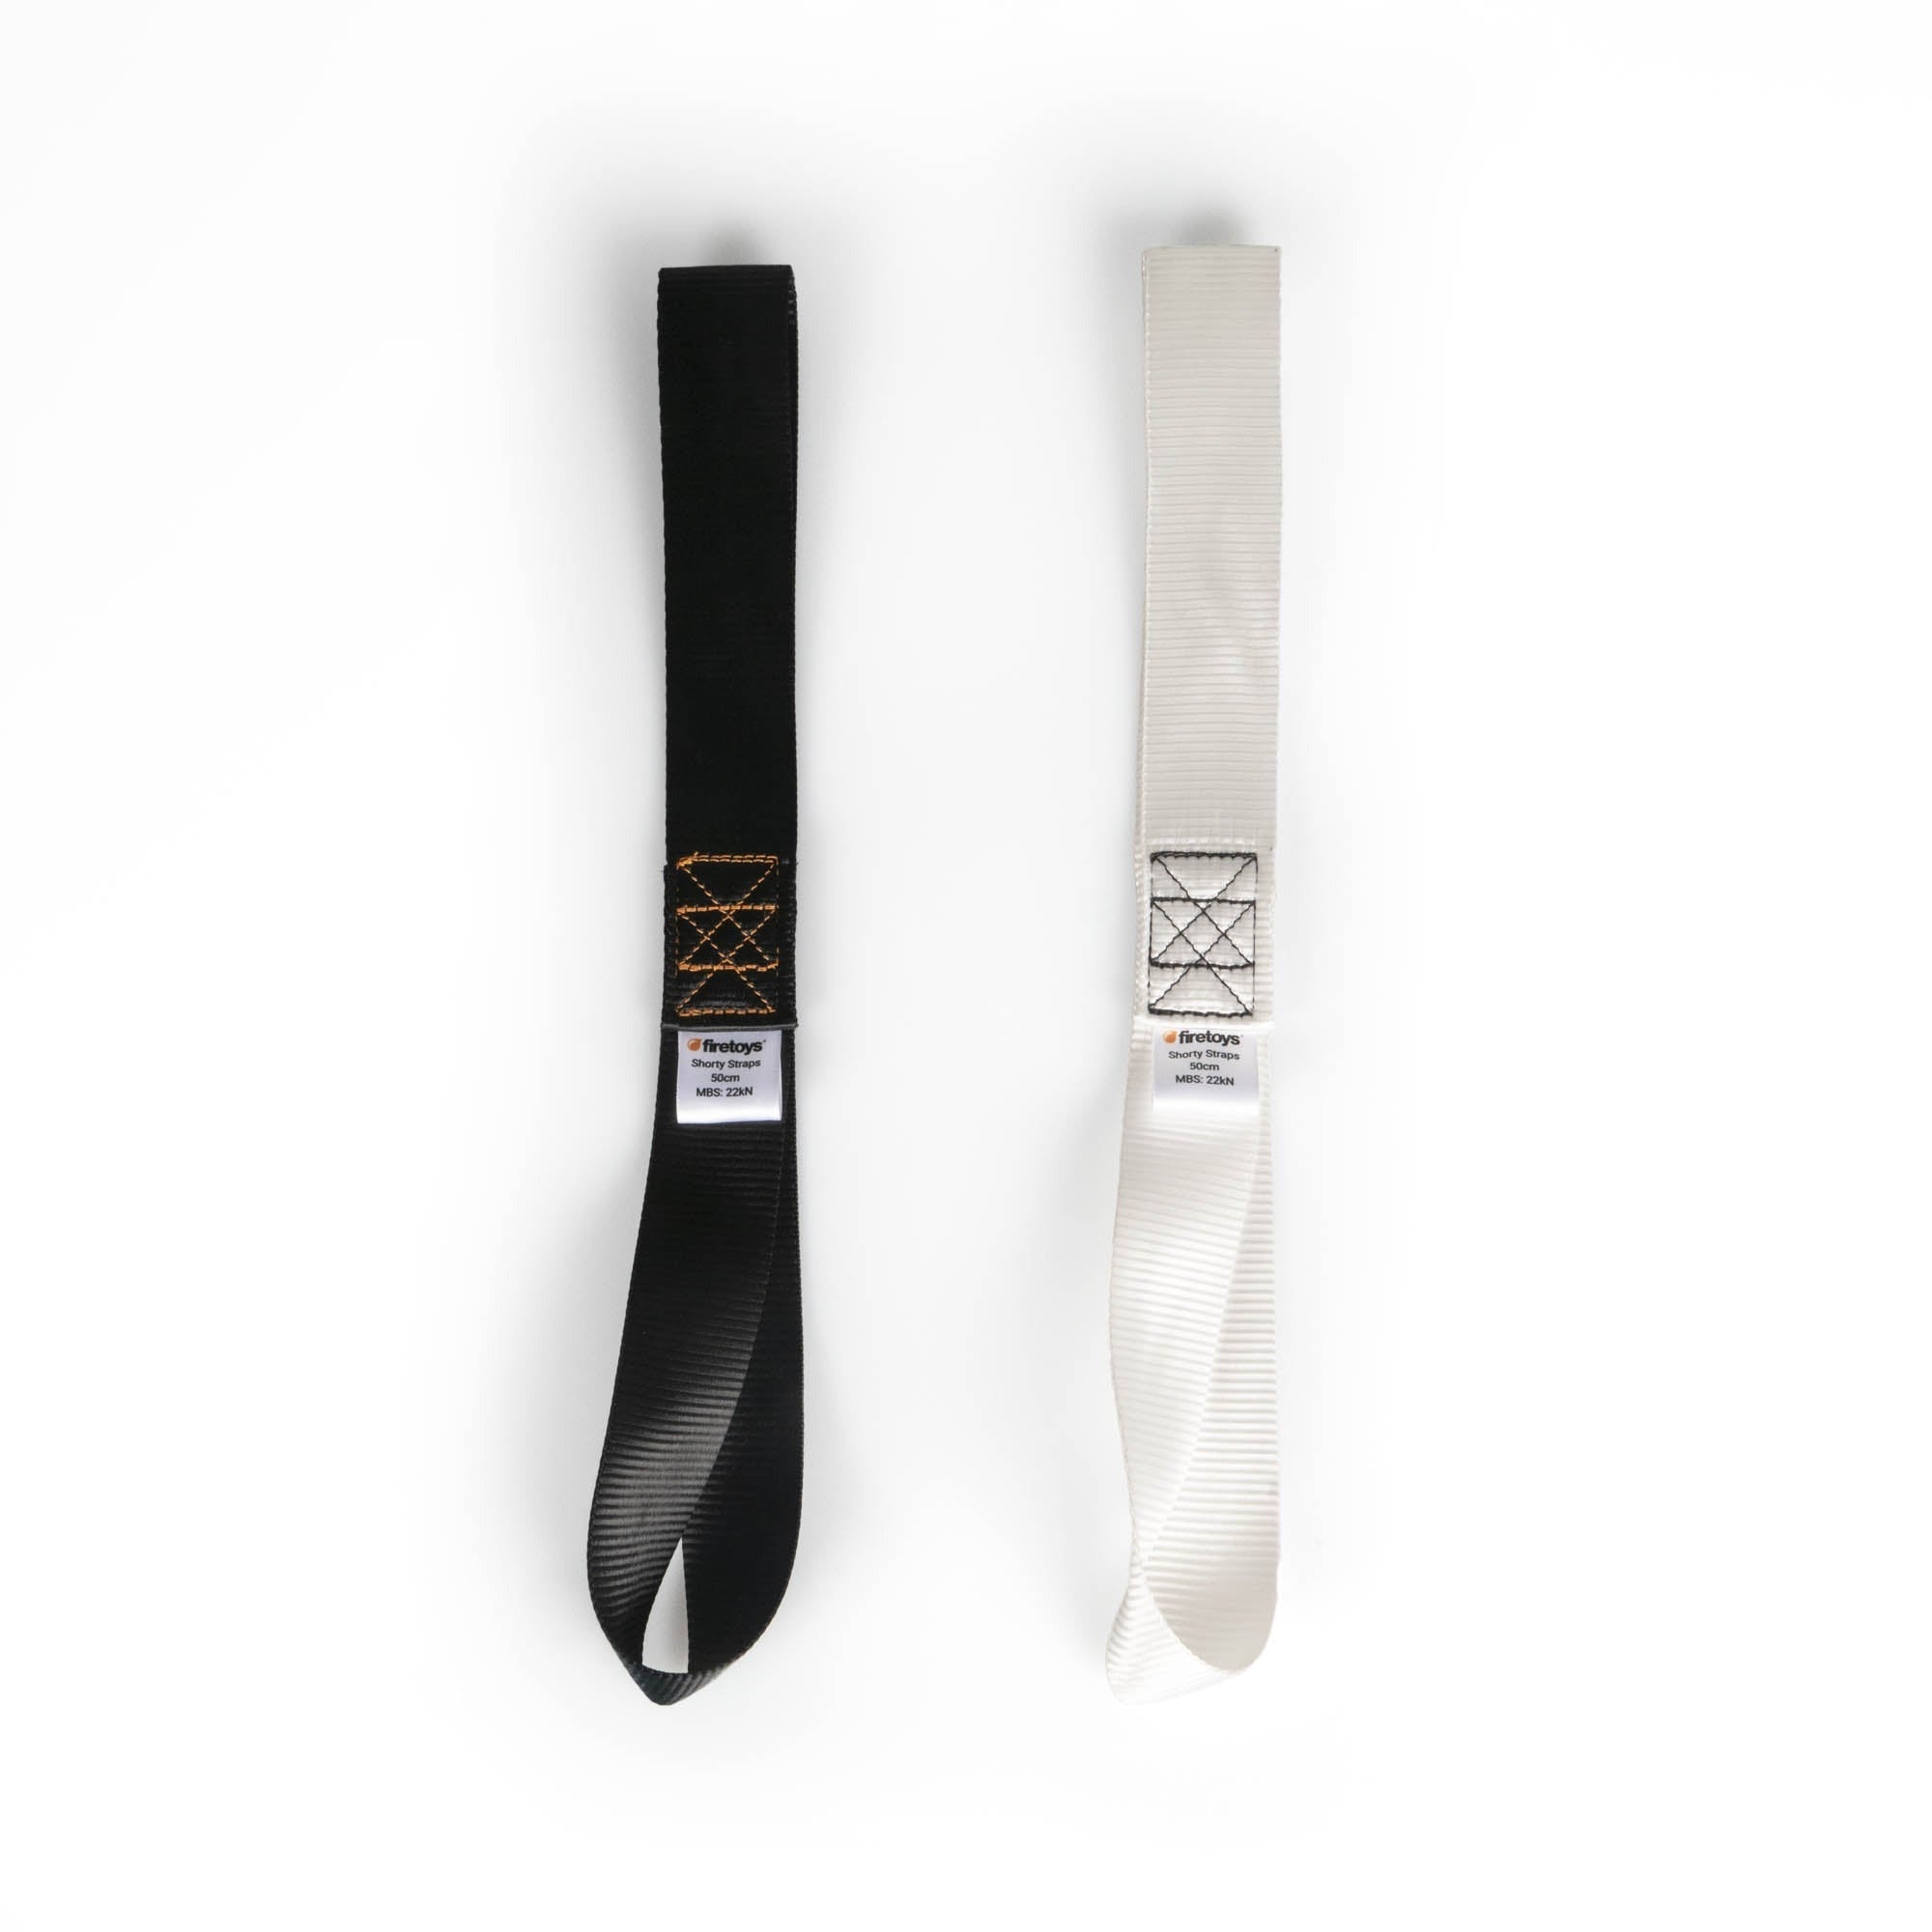 a black shorty strap and a white shorty strap on a white background